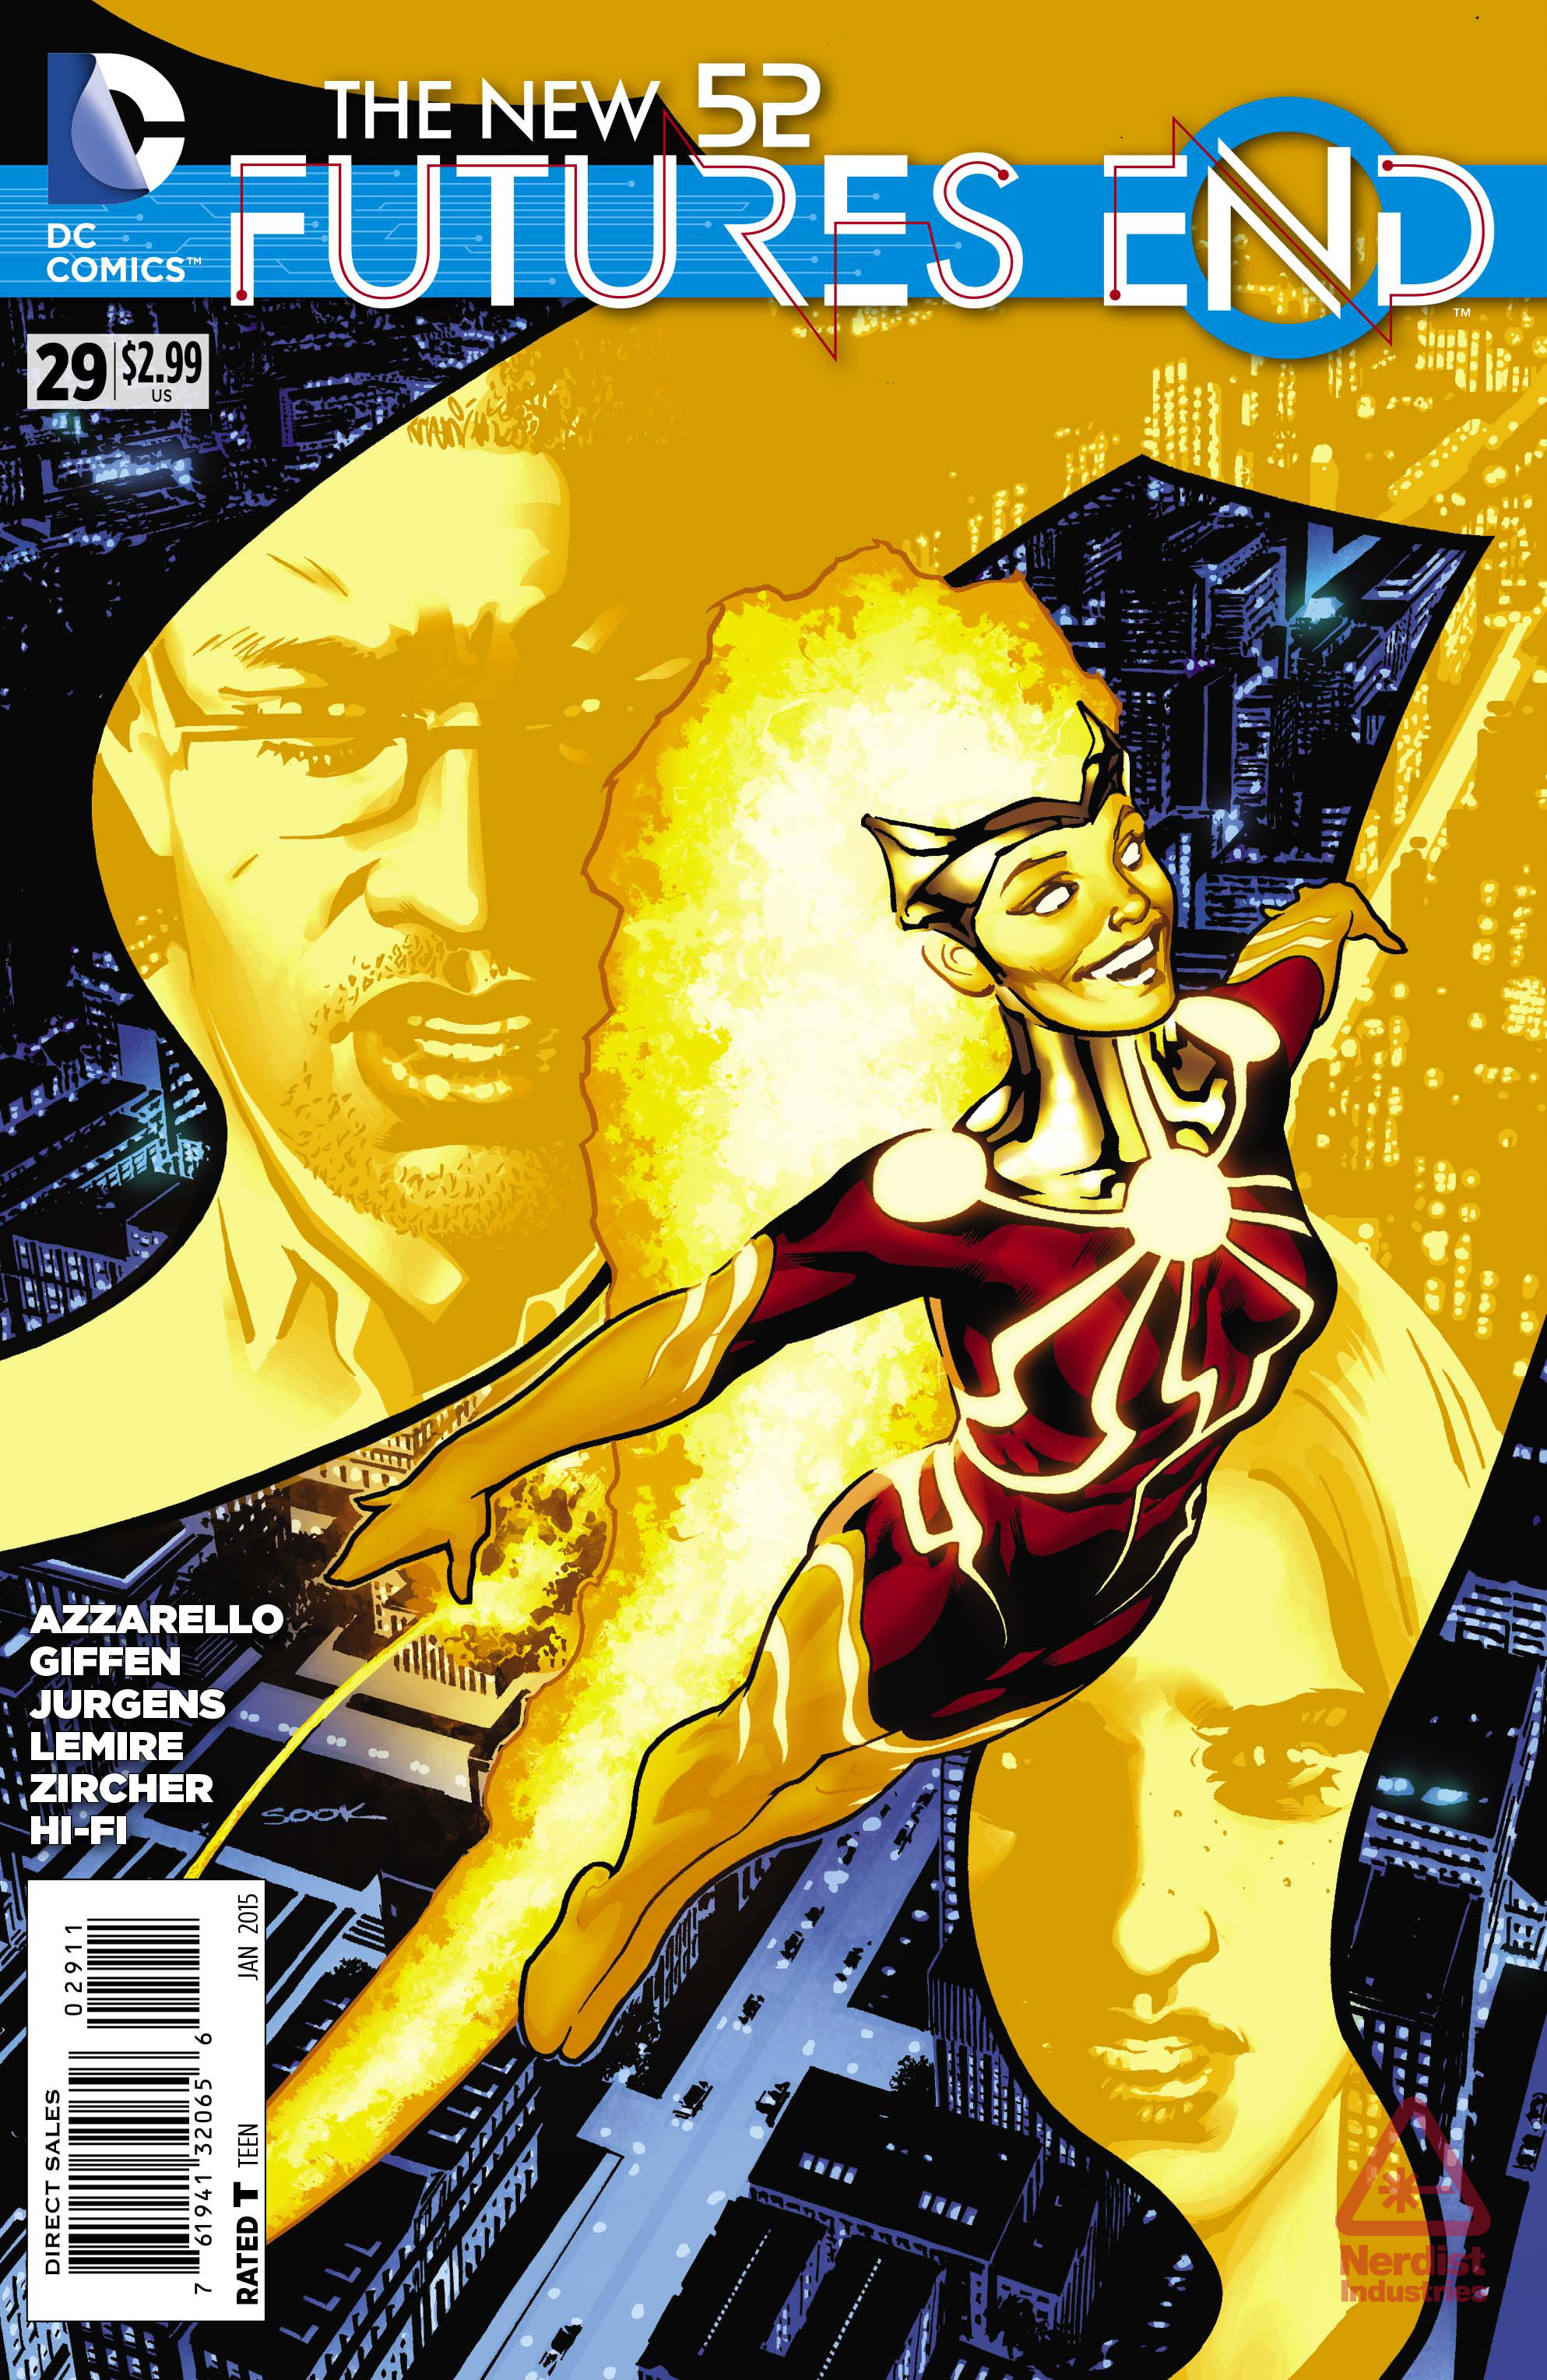 New 52 Futures End #29 (Weekly)